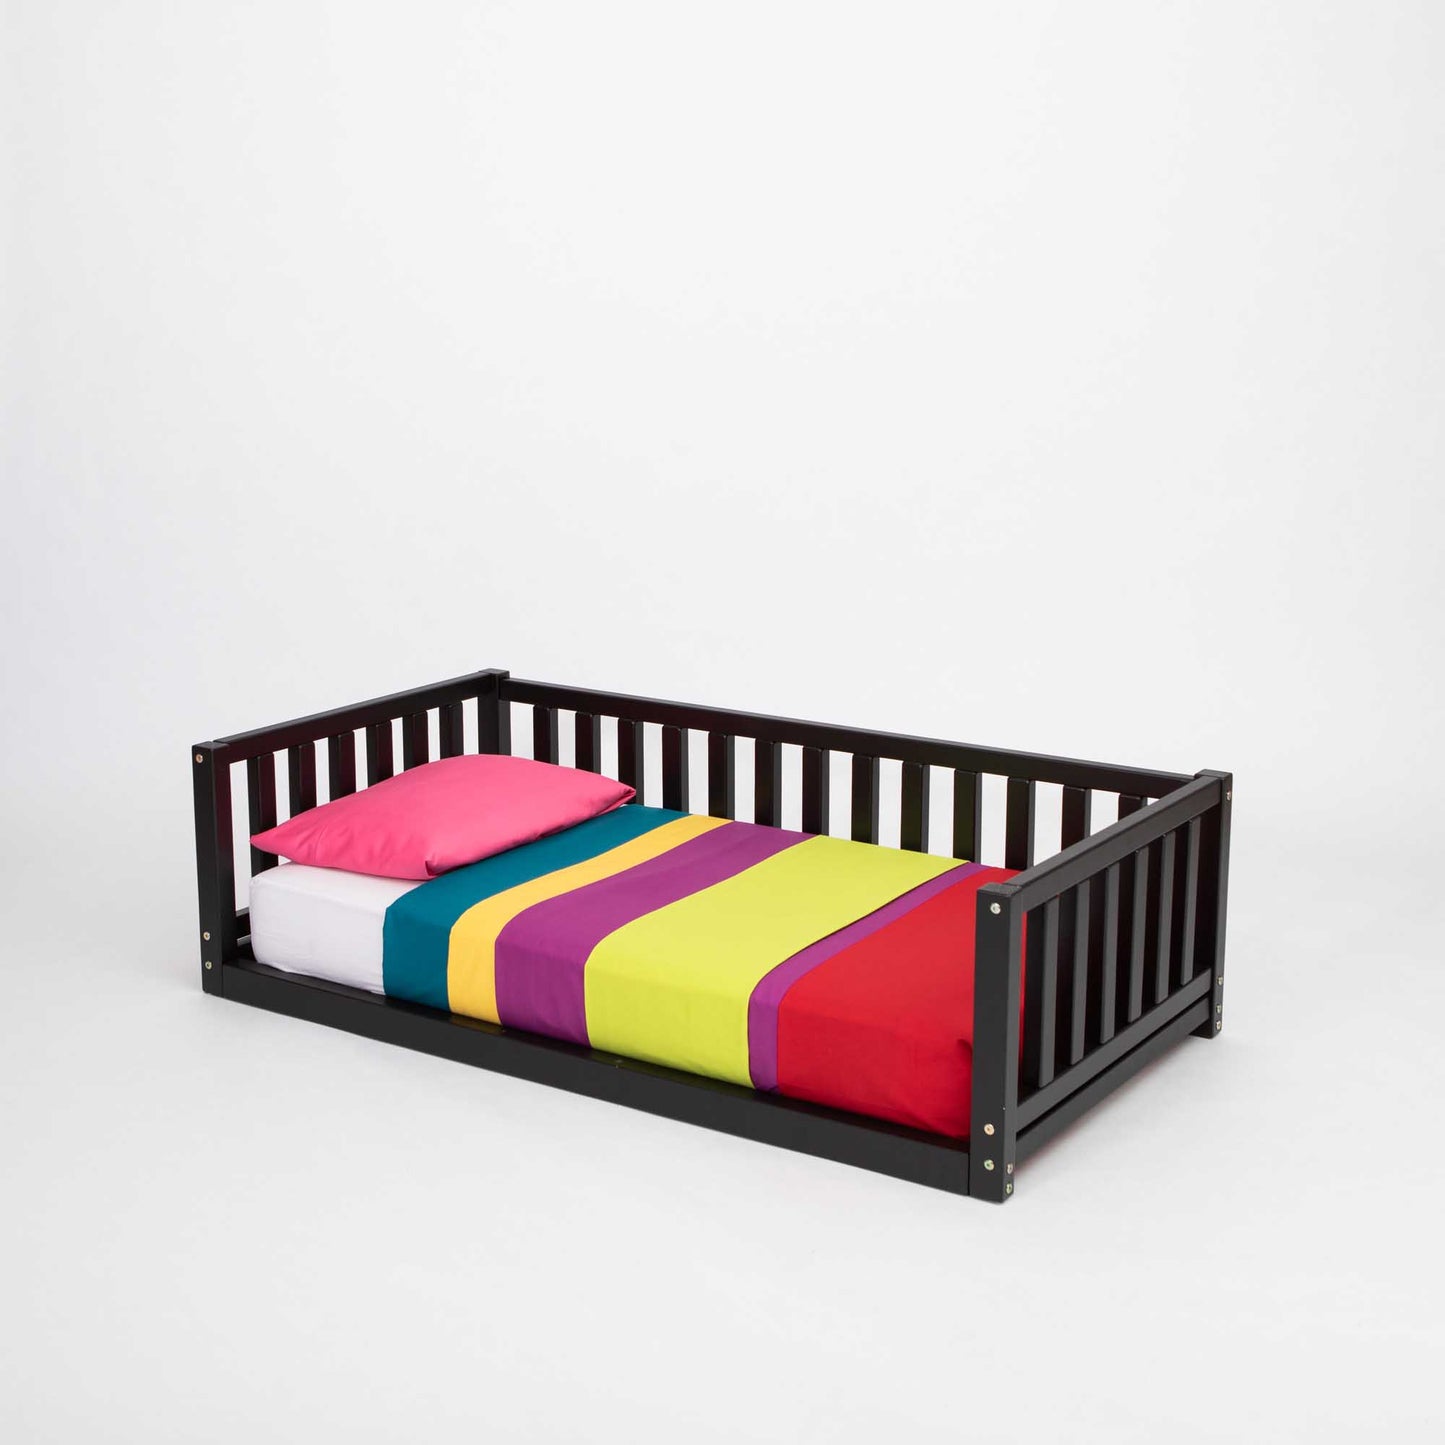 A Sweet Home From Wood 2-in-1 toddler bed on legs with a 3-sided vertical rail and colorful striped sheets.